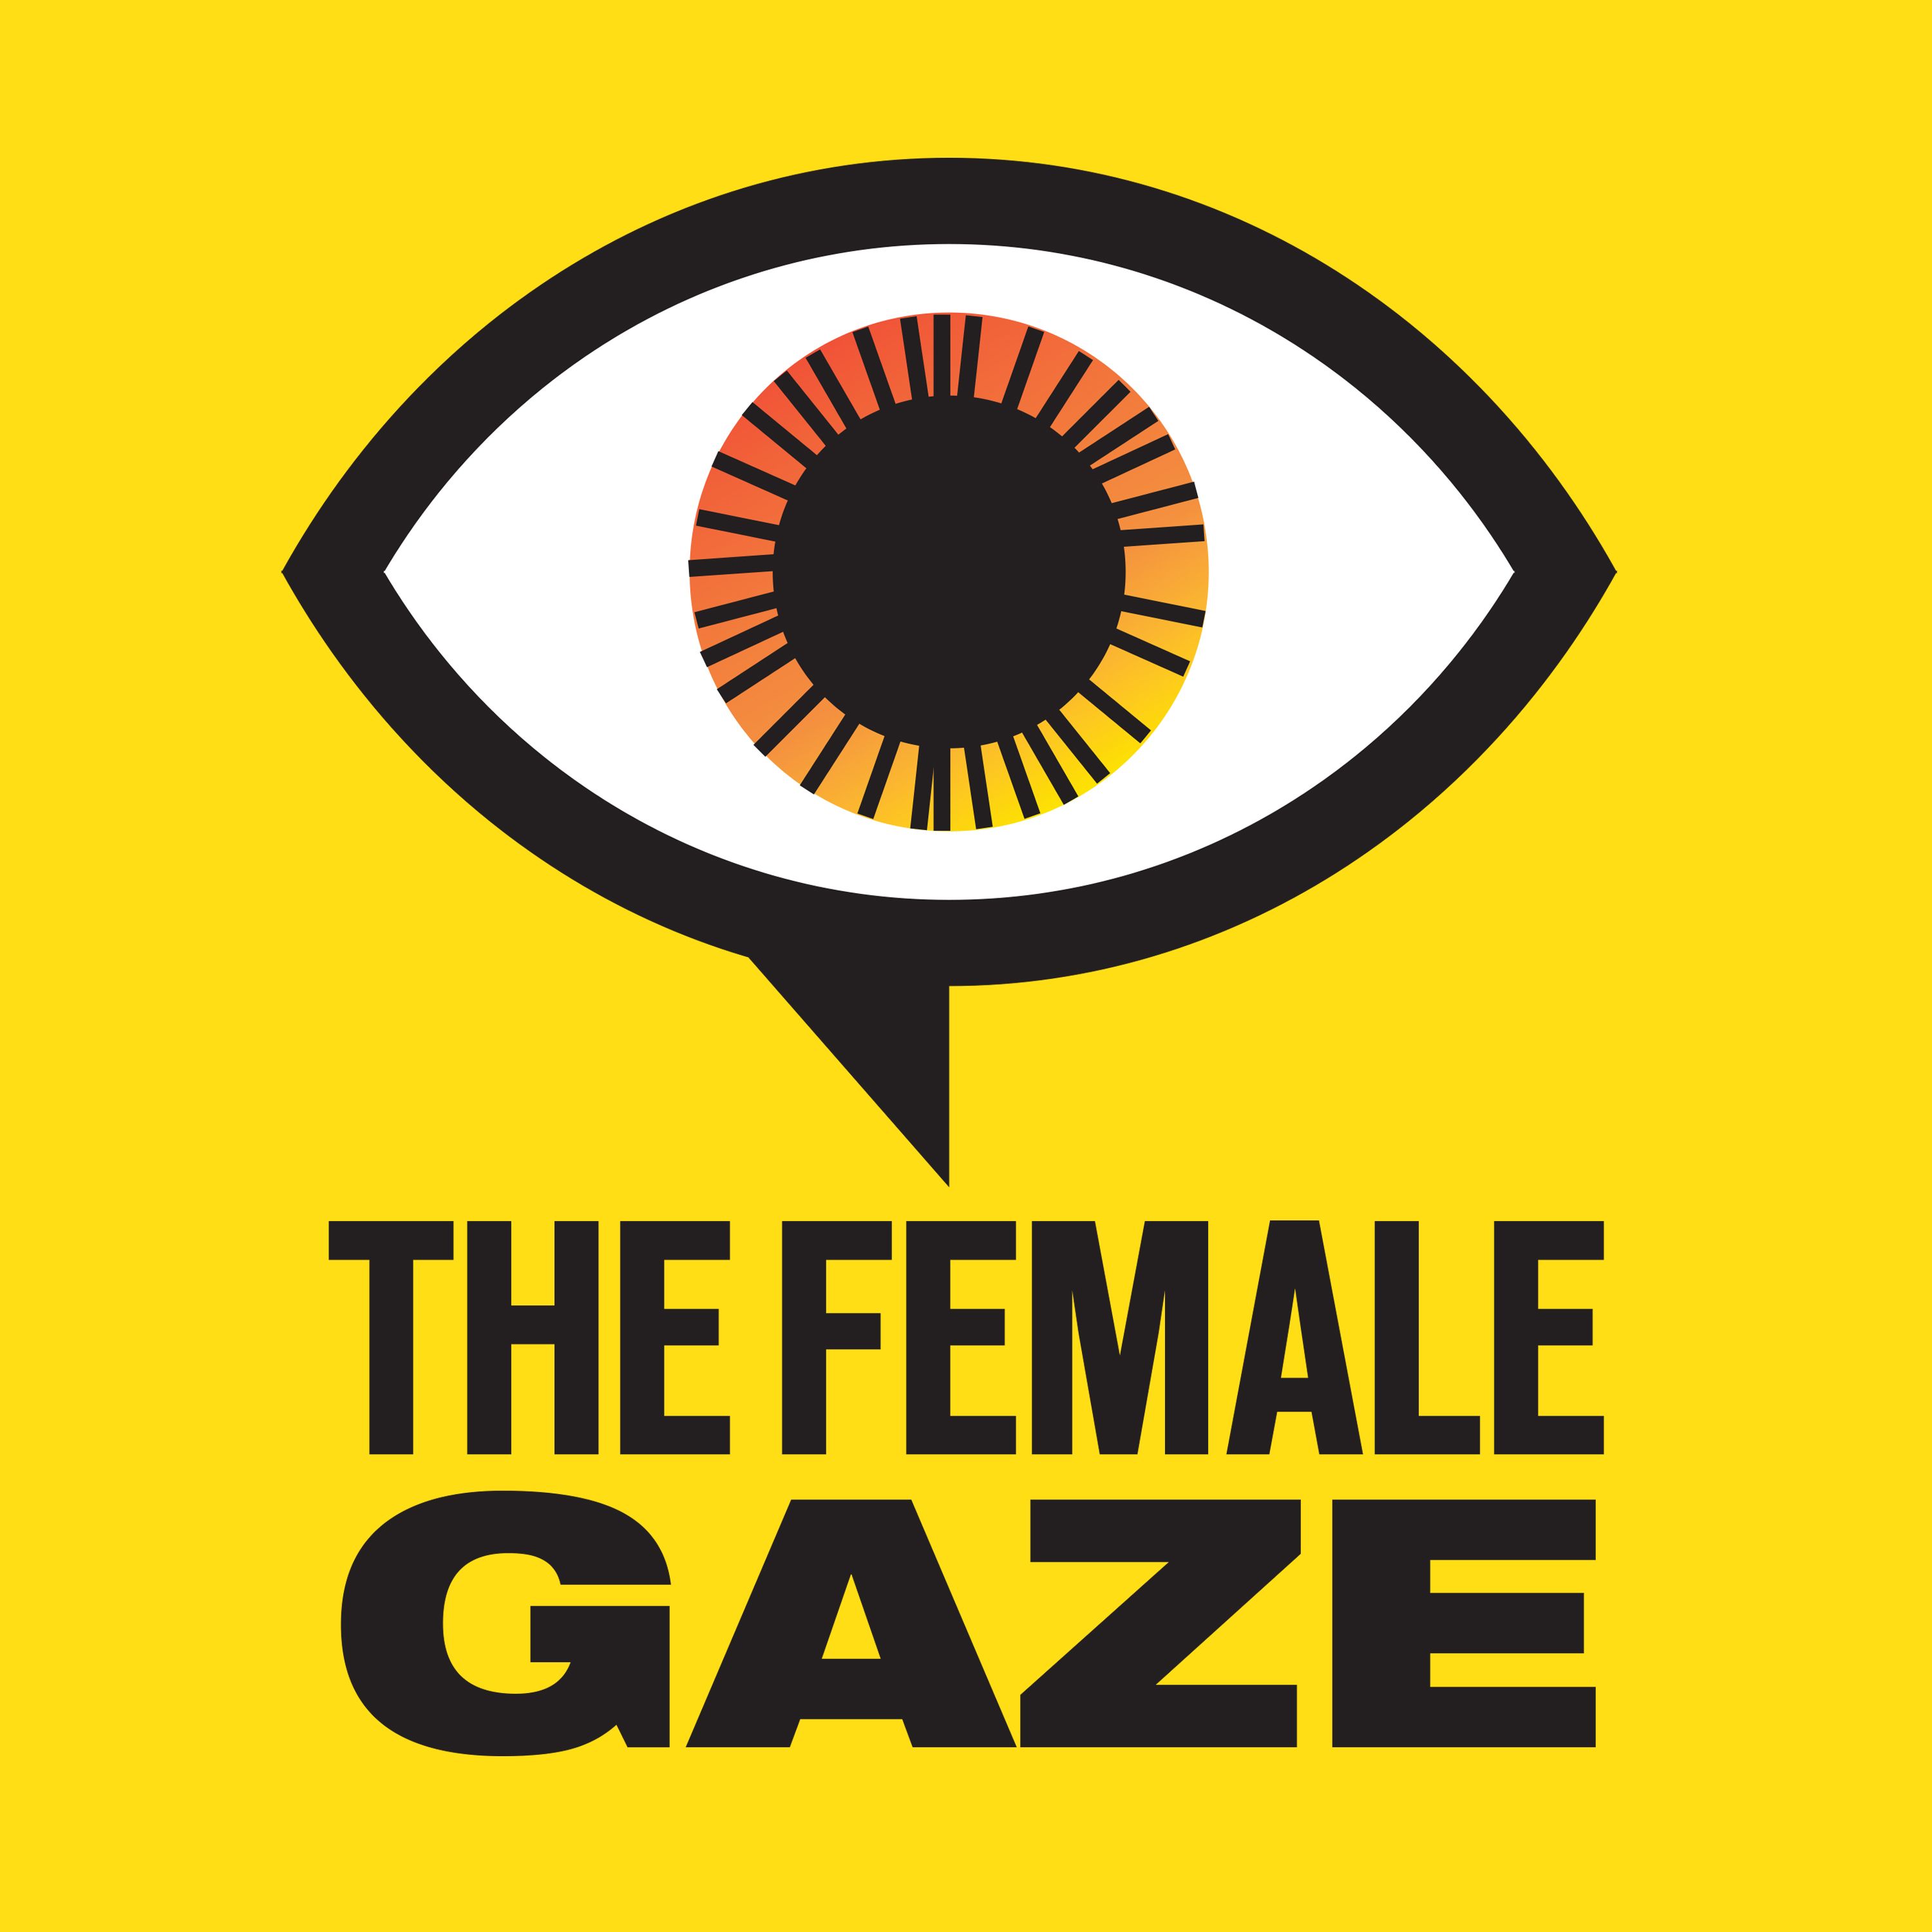 The Female Gaze is coming for YOU!